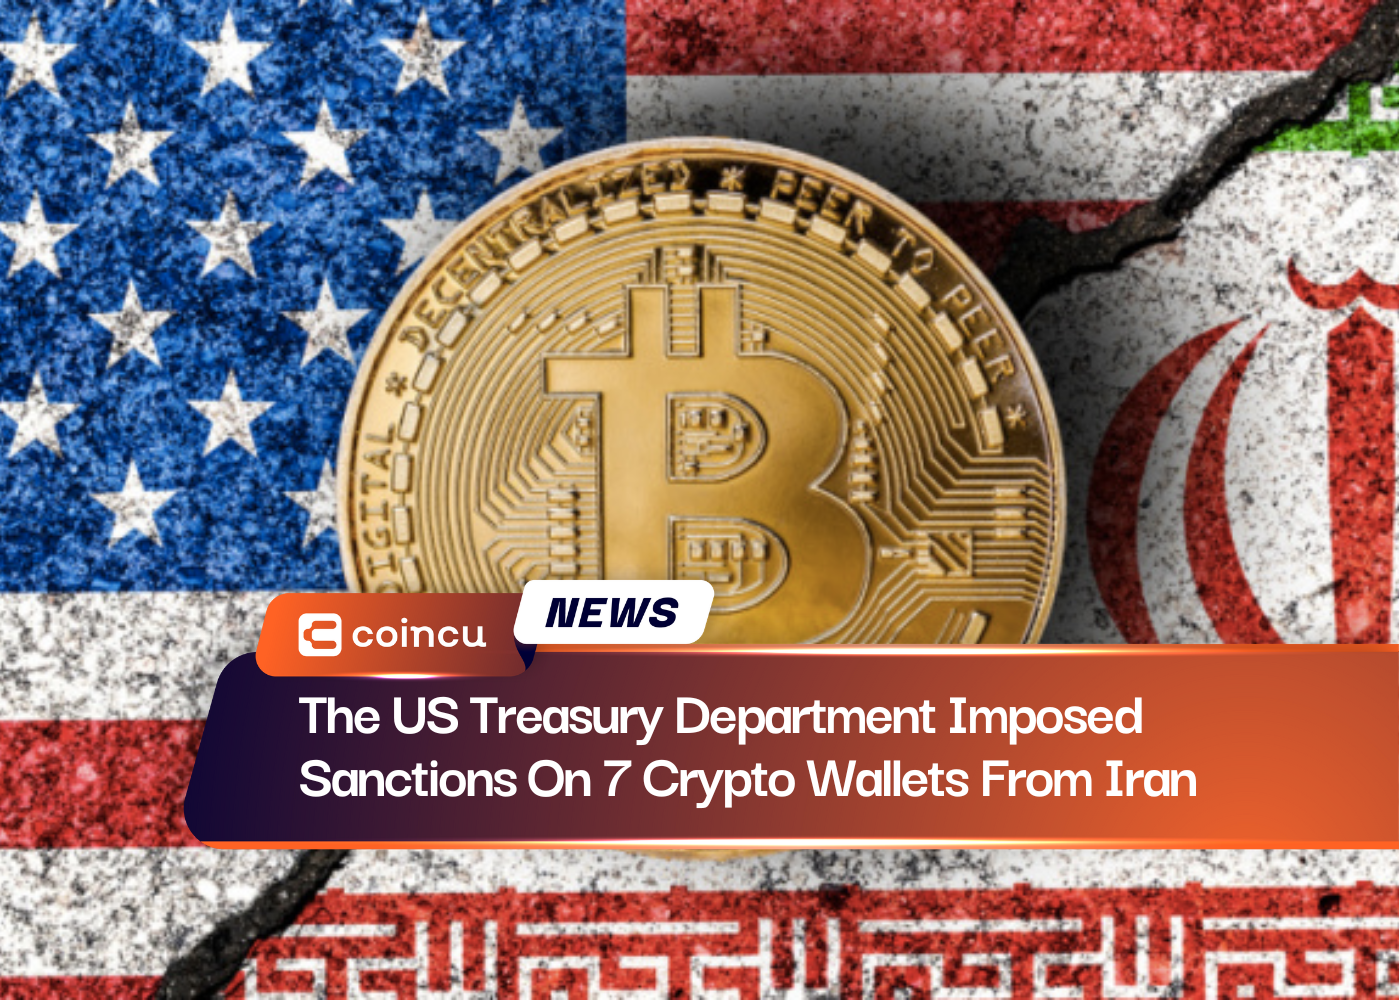 The US Treasury Department Imposed Sanctions On 7 Crypto Wallets From Iran